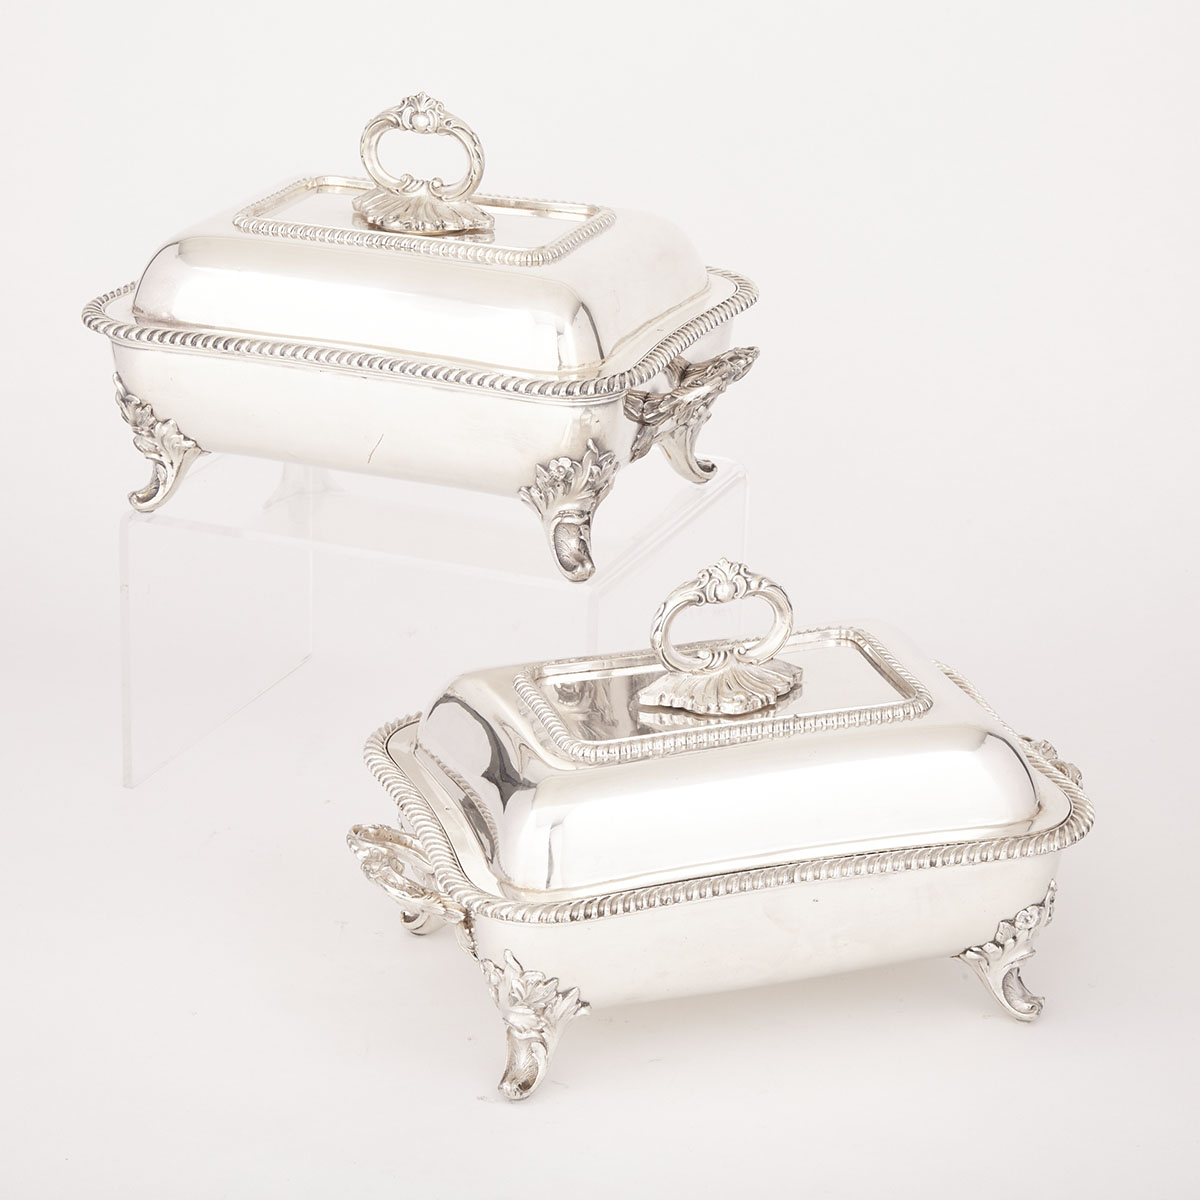 Pair of Old Sheffield Plate Rectangular Covered Entrée Dishes with Warming Stands, c.1820